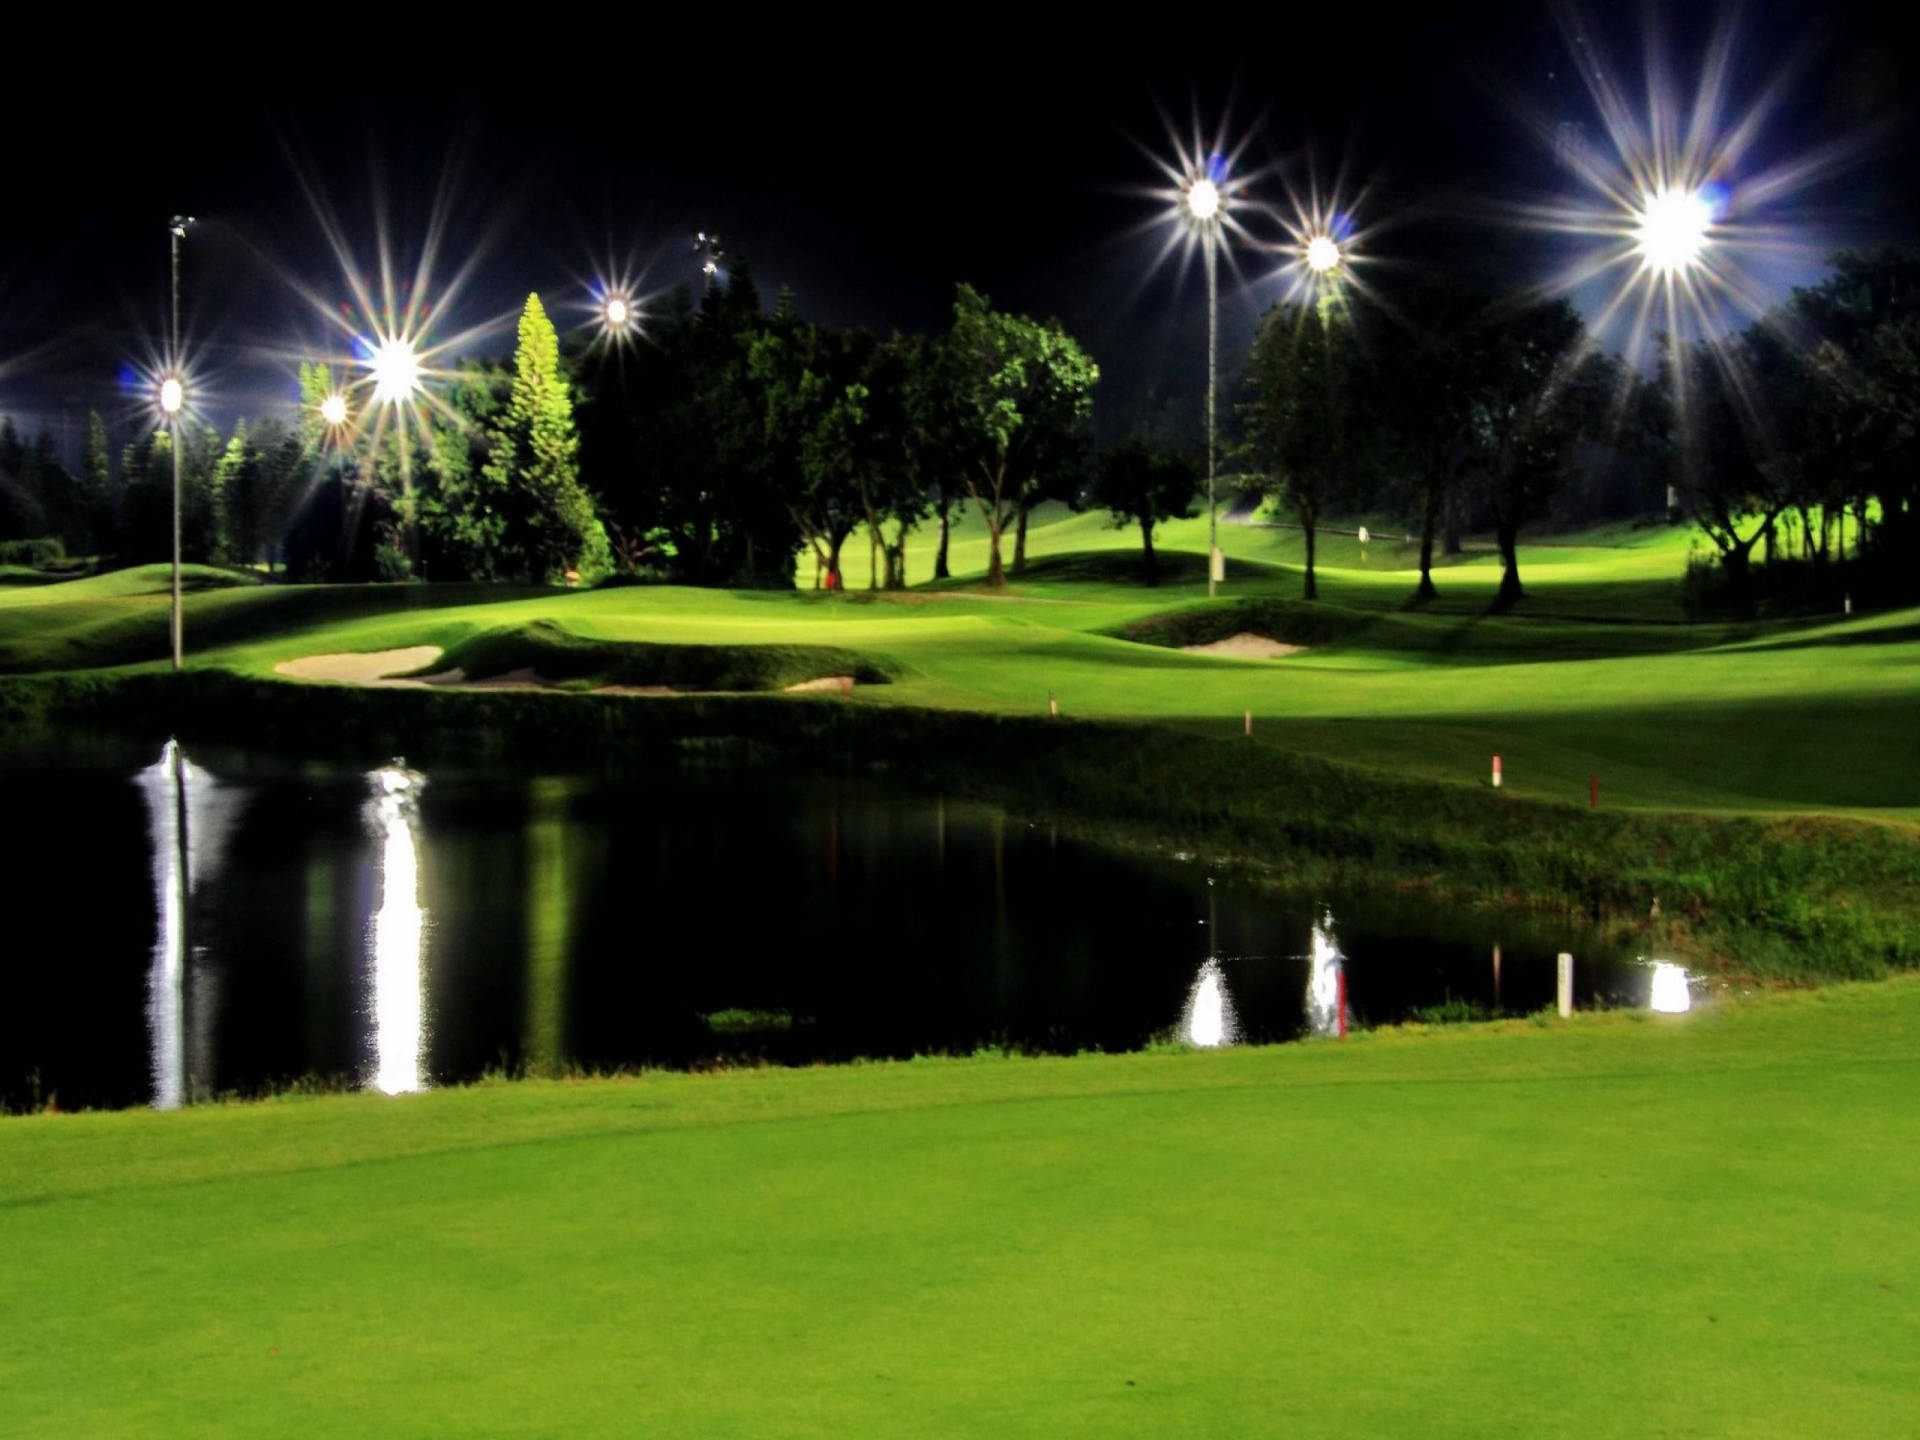 Golf In The Night Background